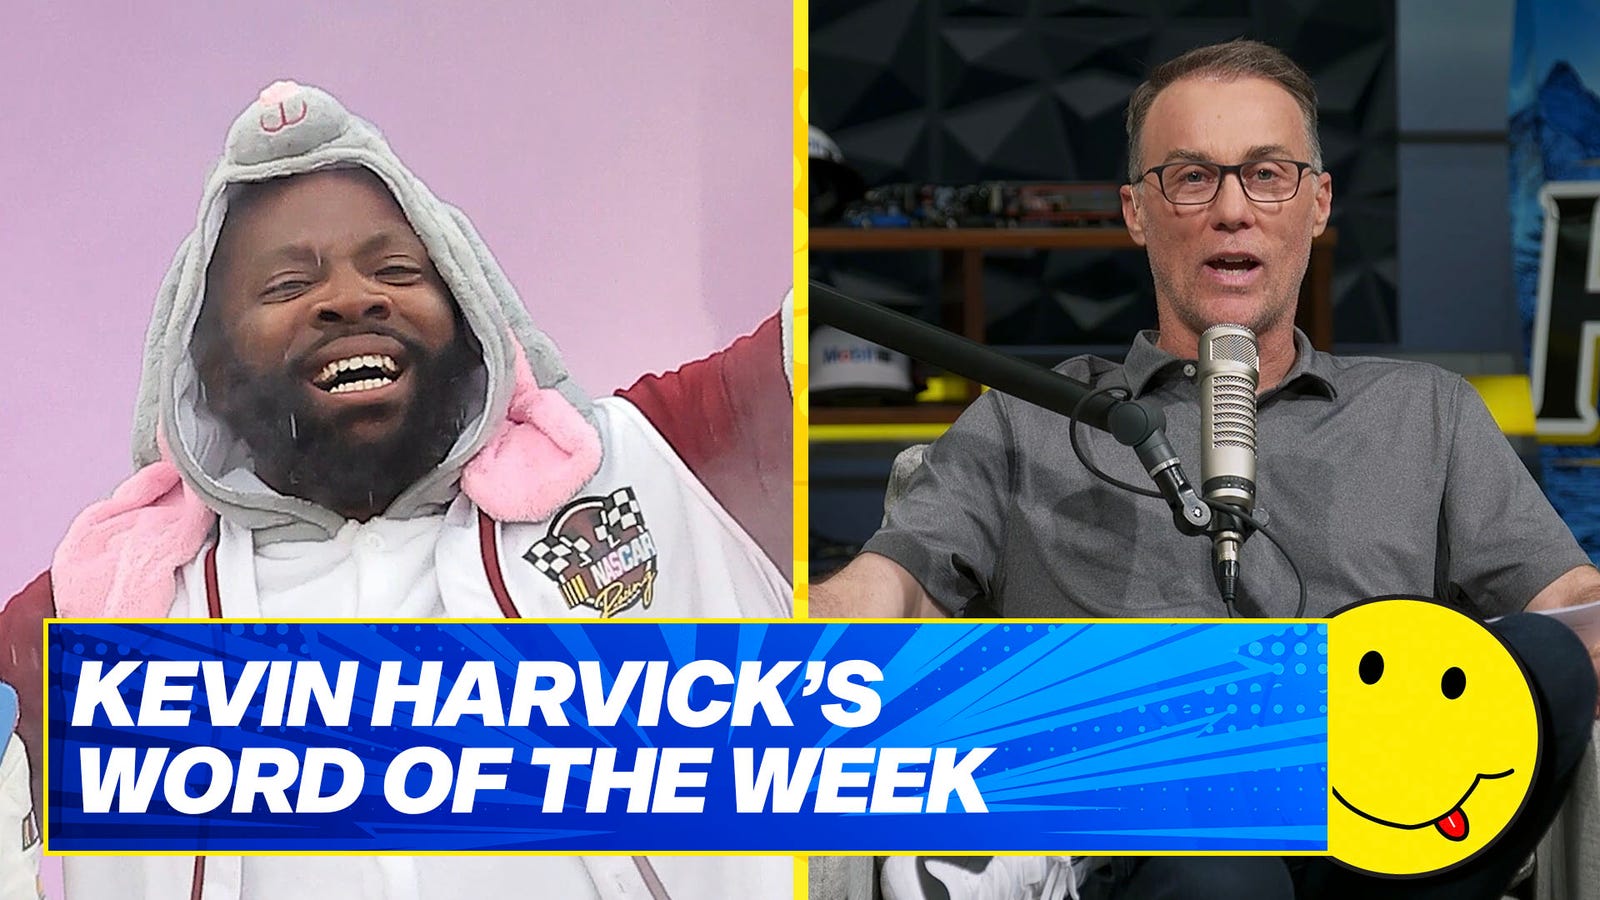 Kevin Harvick’s word of the week, Mamba wears bunny suit for NASCAR broadcast